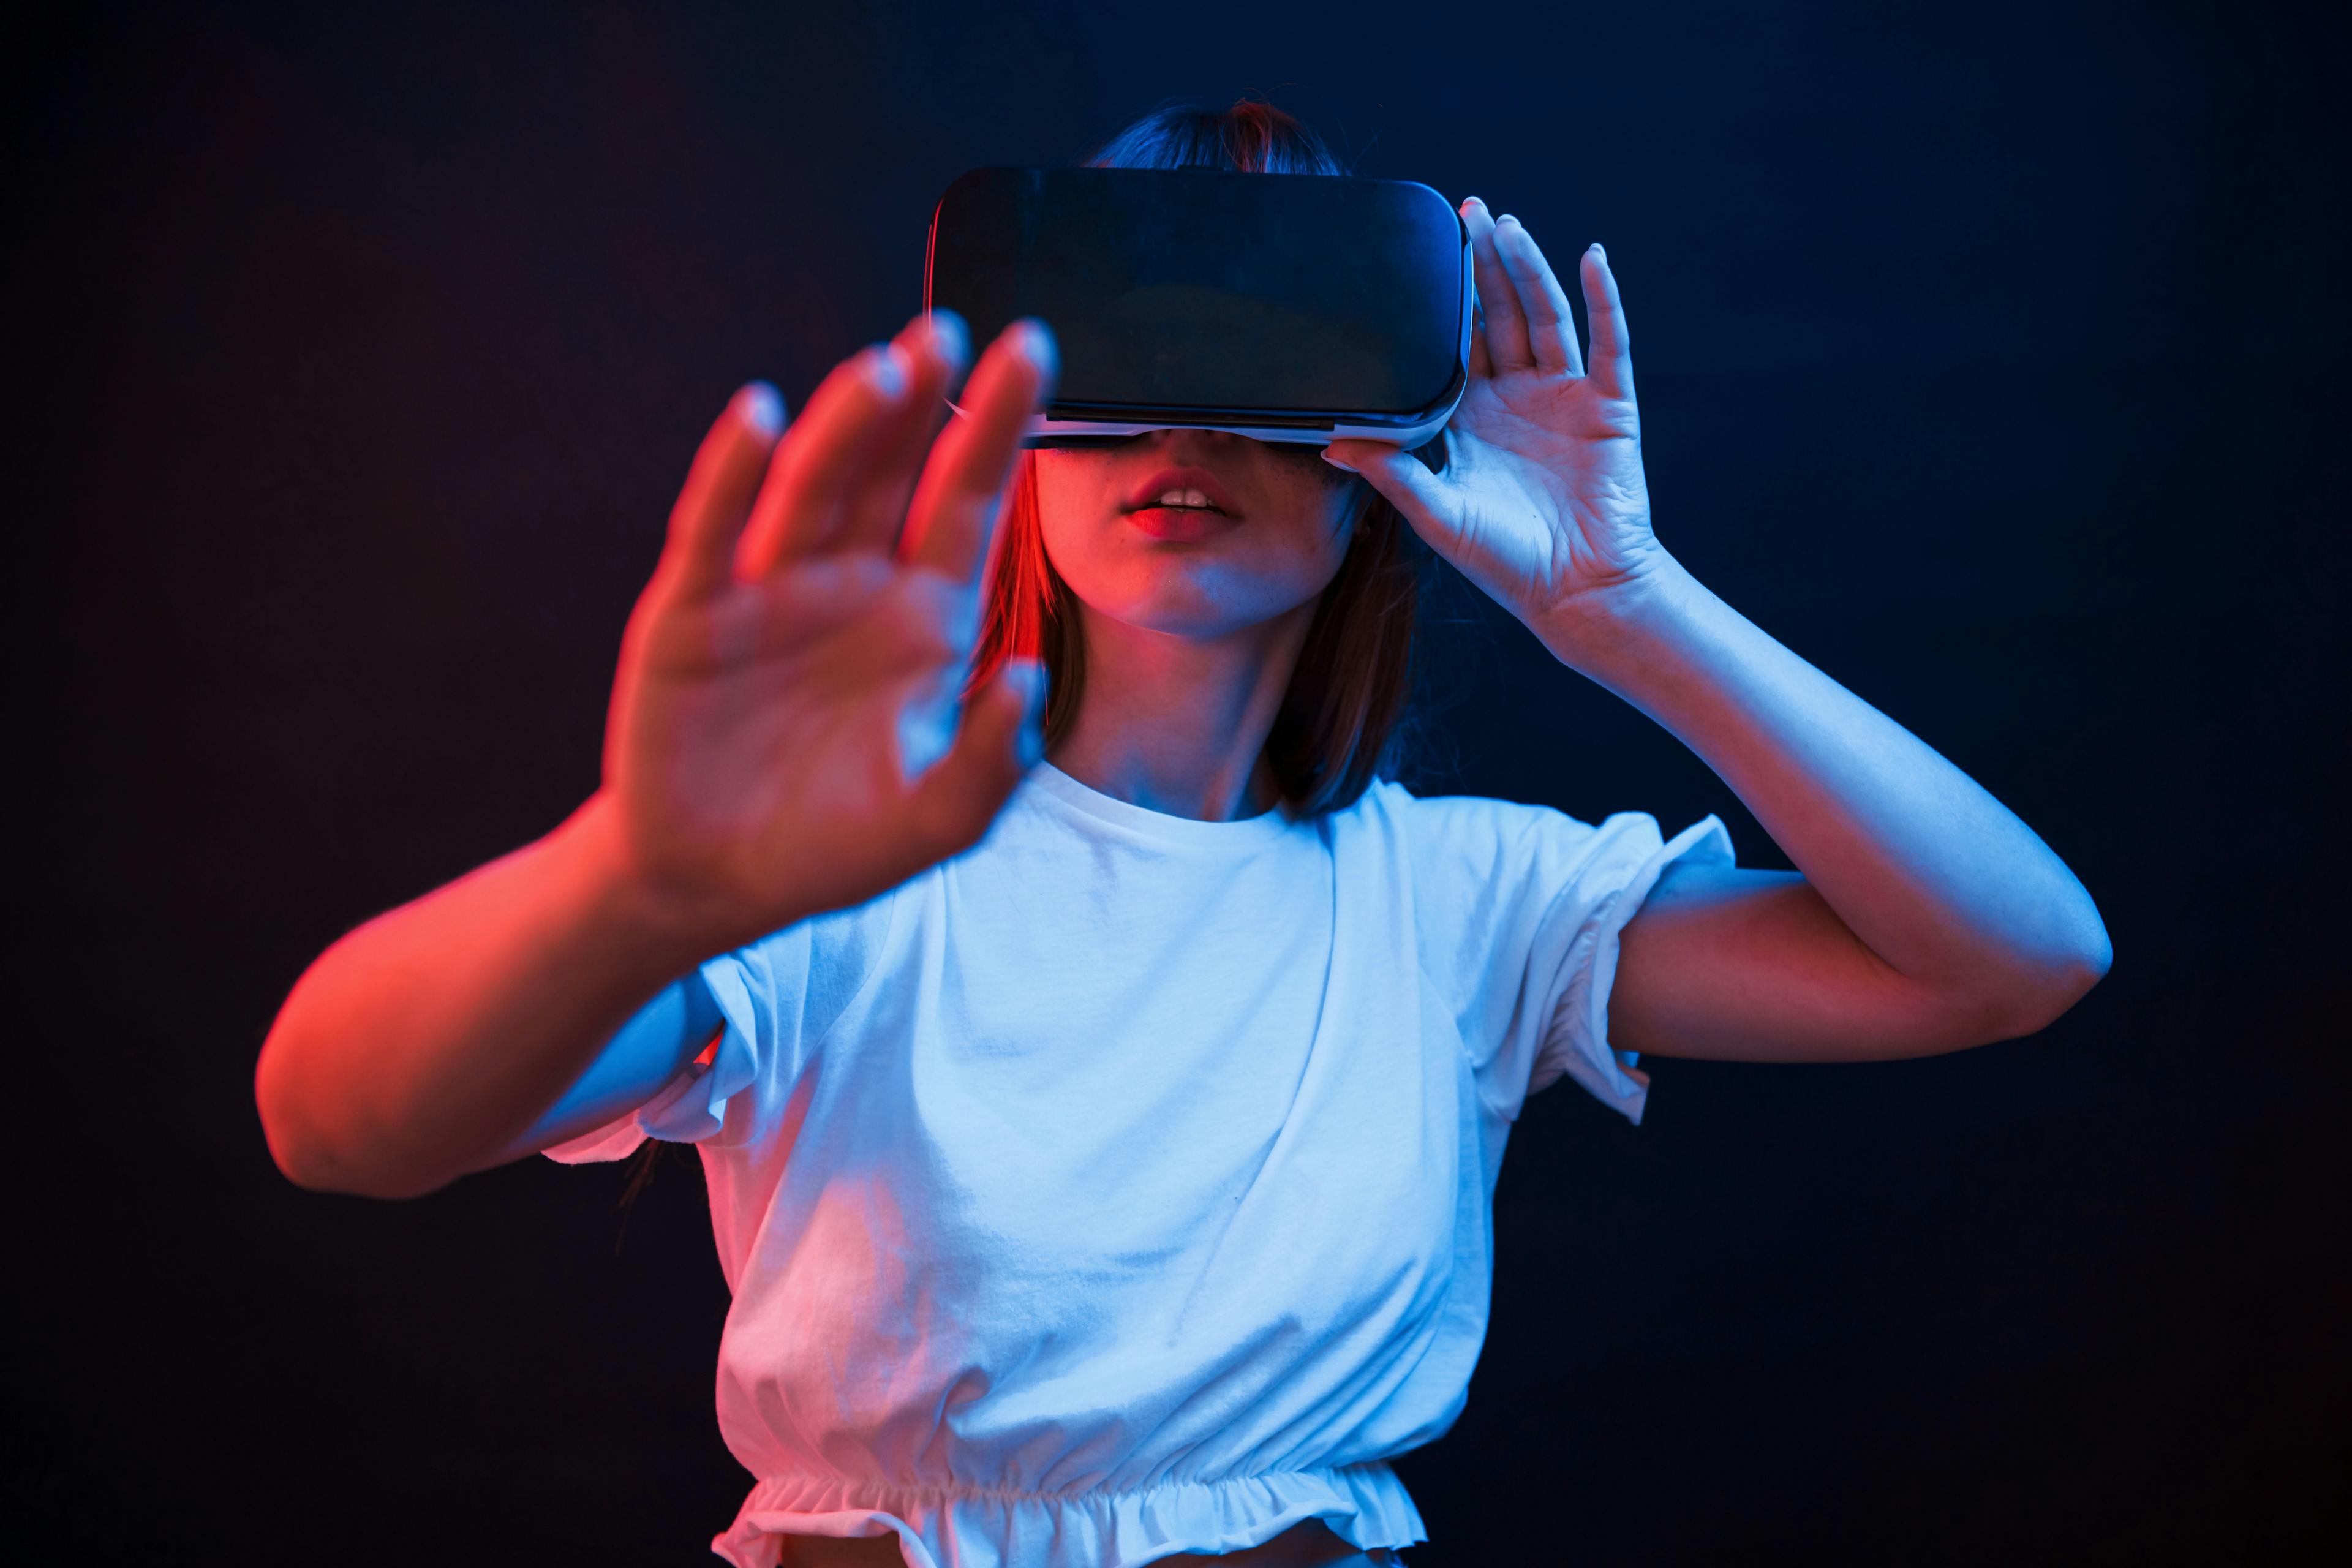 A person using a VR headset with their hands outstretched